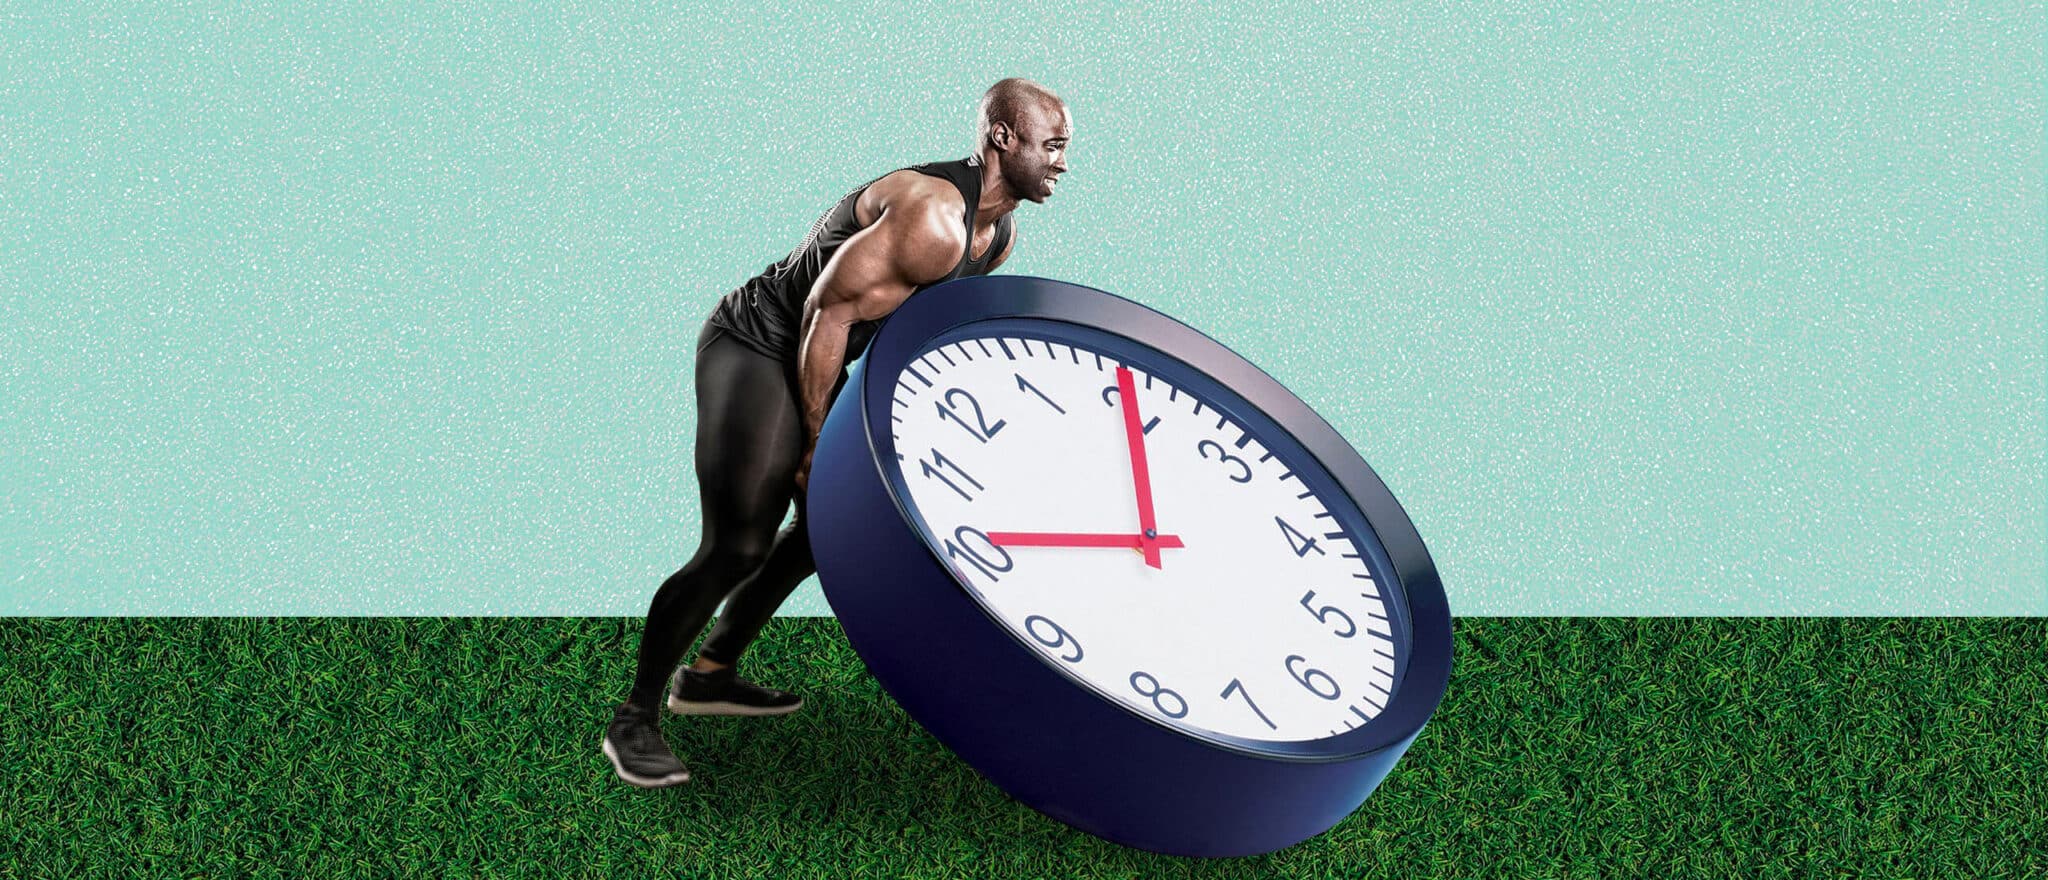 Does Intermittent Fasting Increase Testosterone?